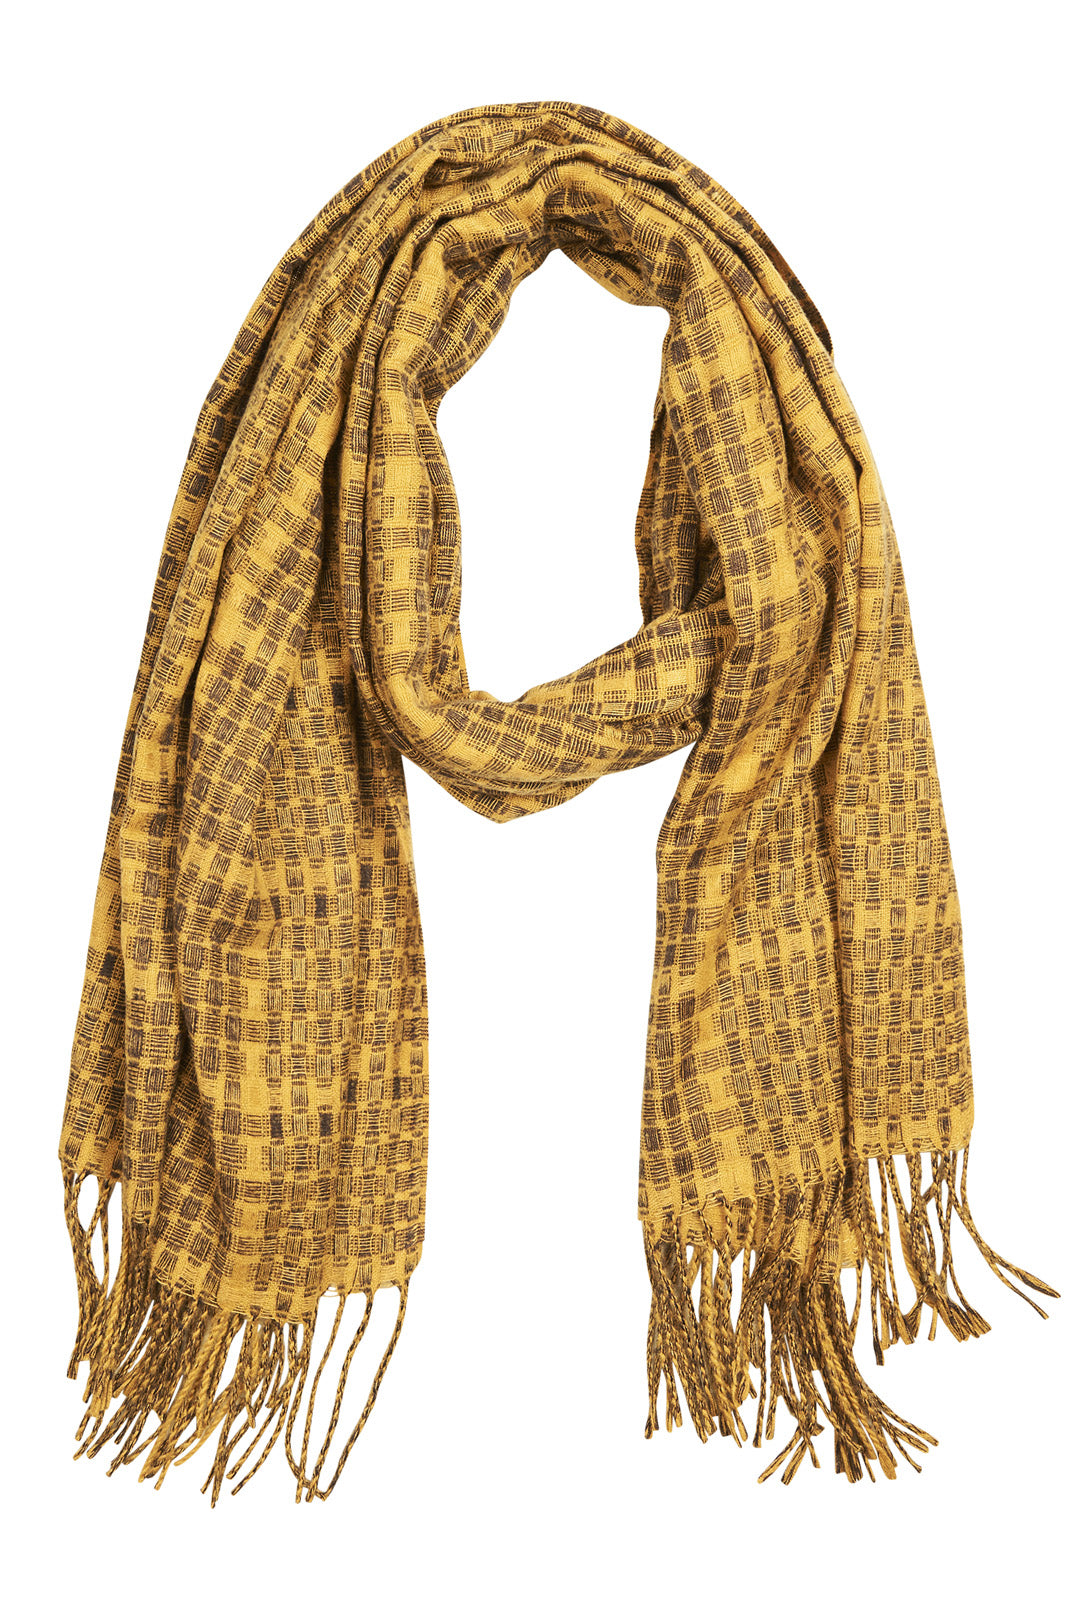 Bruny Scarf - Mustard - eb&ive Scarves